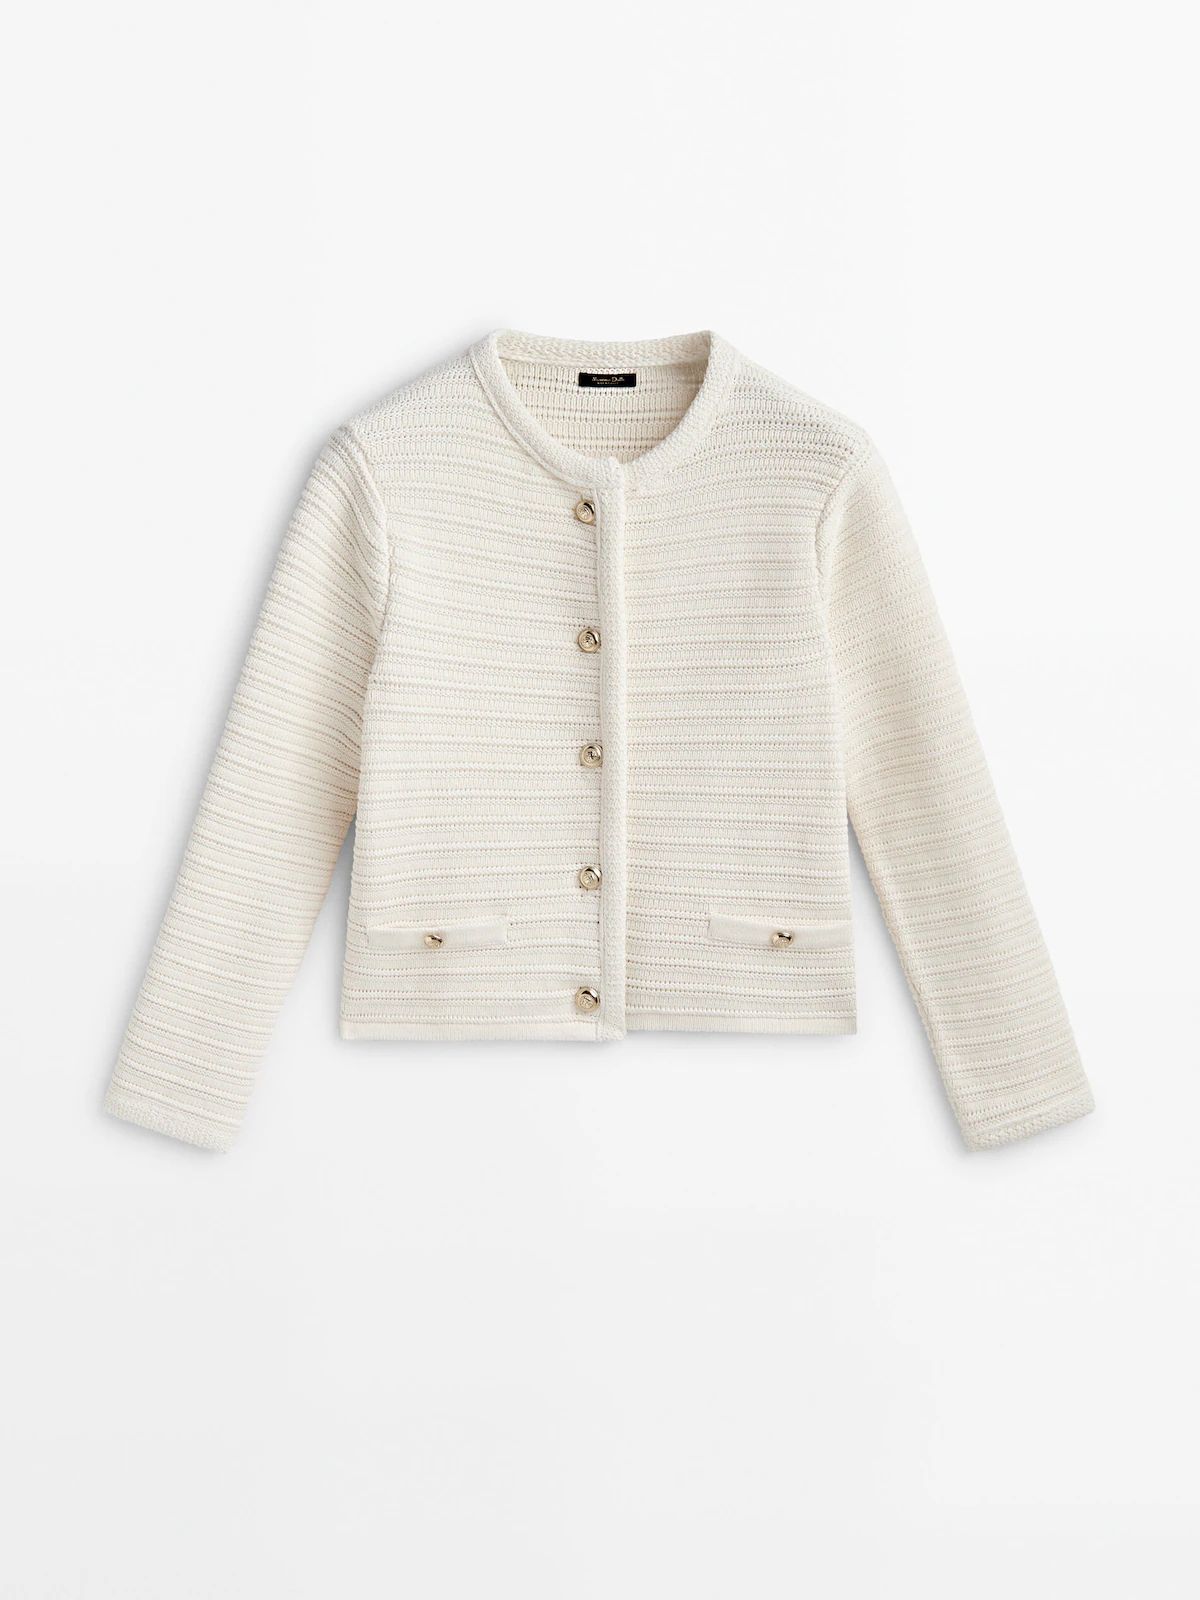 Textured knit cardigan with gold buttons | Massimo Dutti (US)